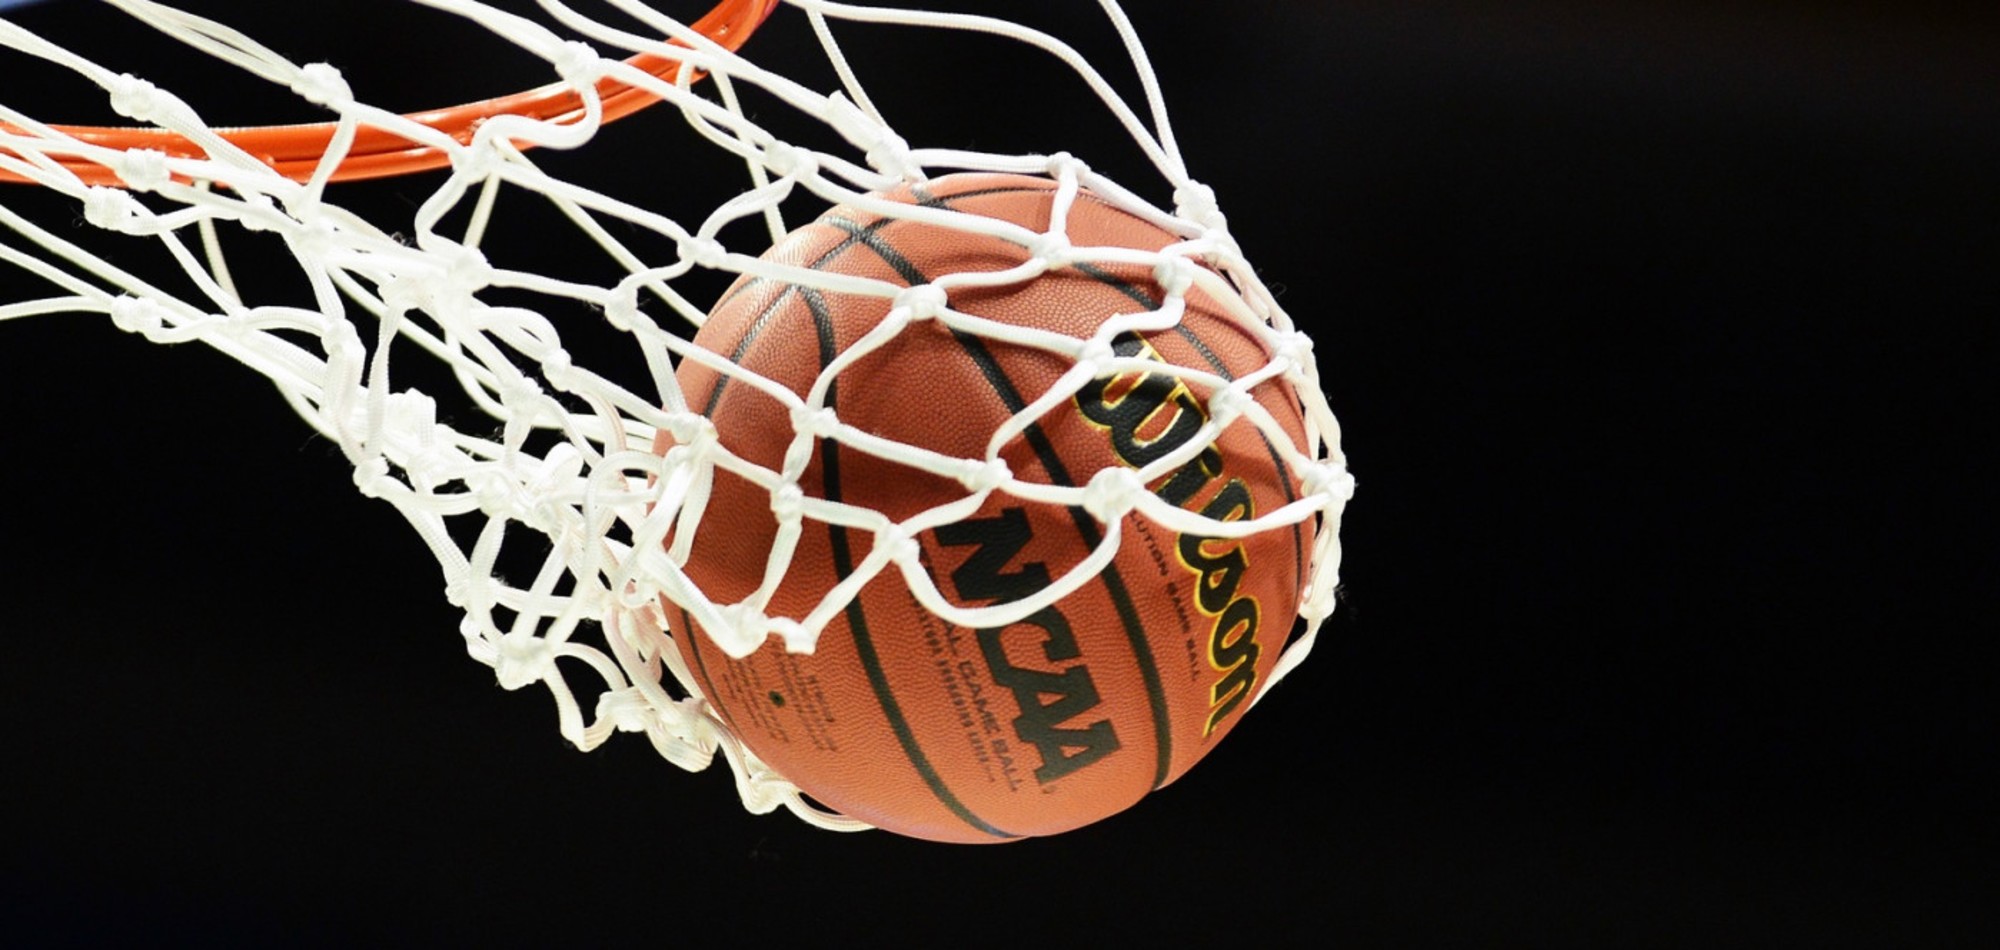 Games of group A, B and E of FIBA Asia Cup 2021 Qualifiers February Window postponed